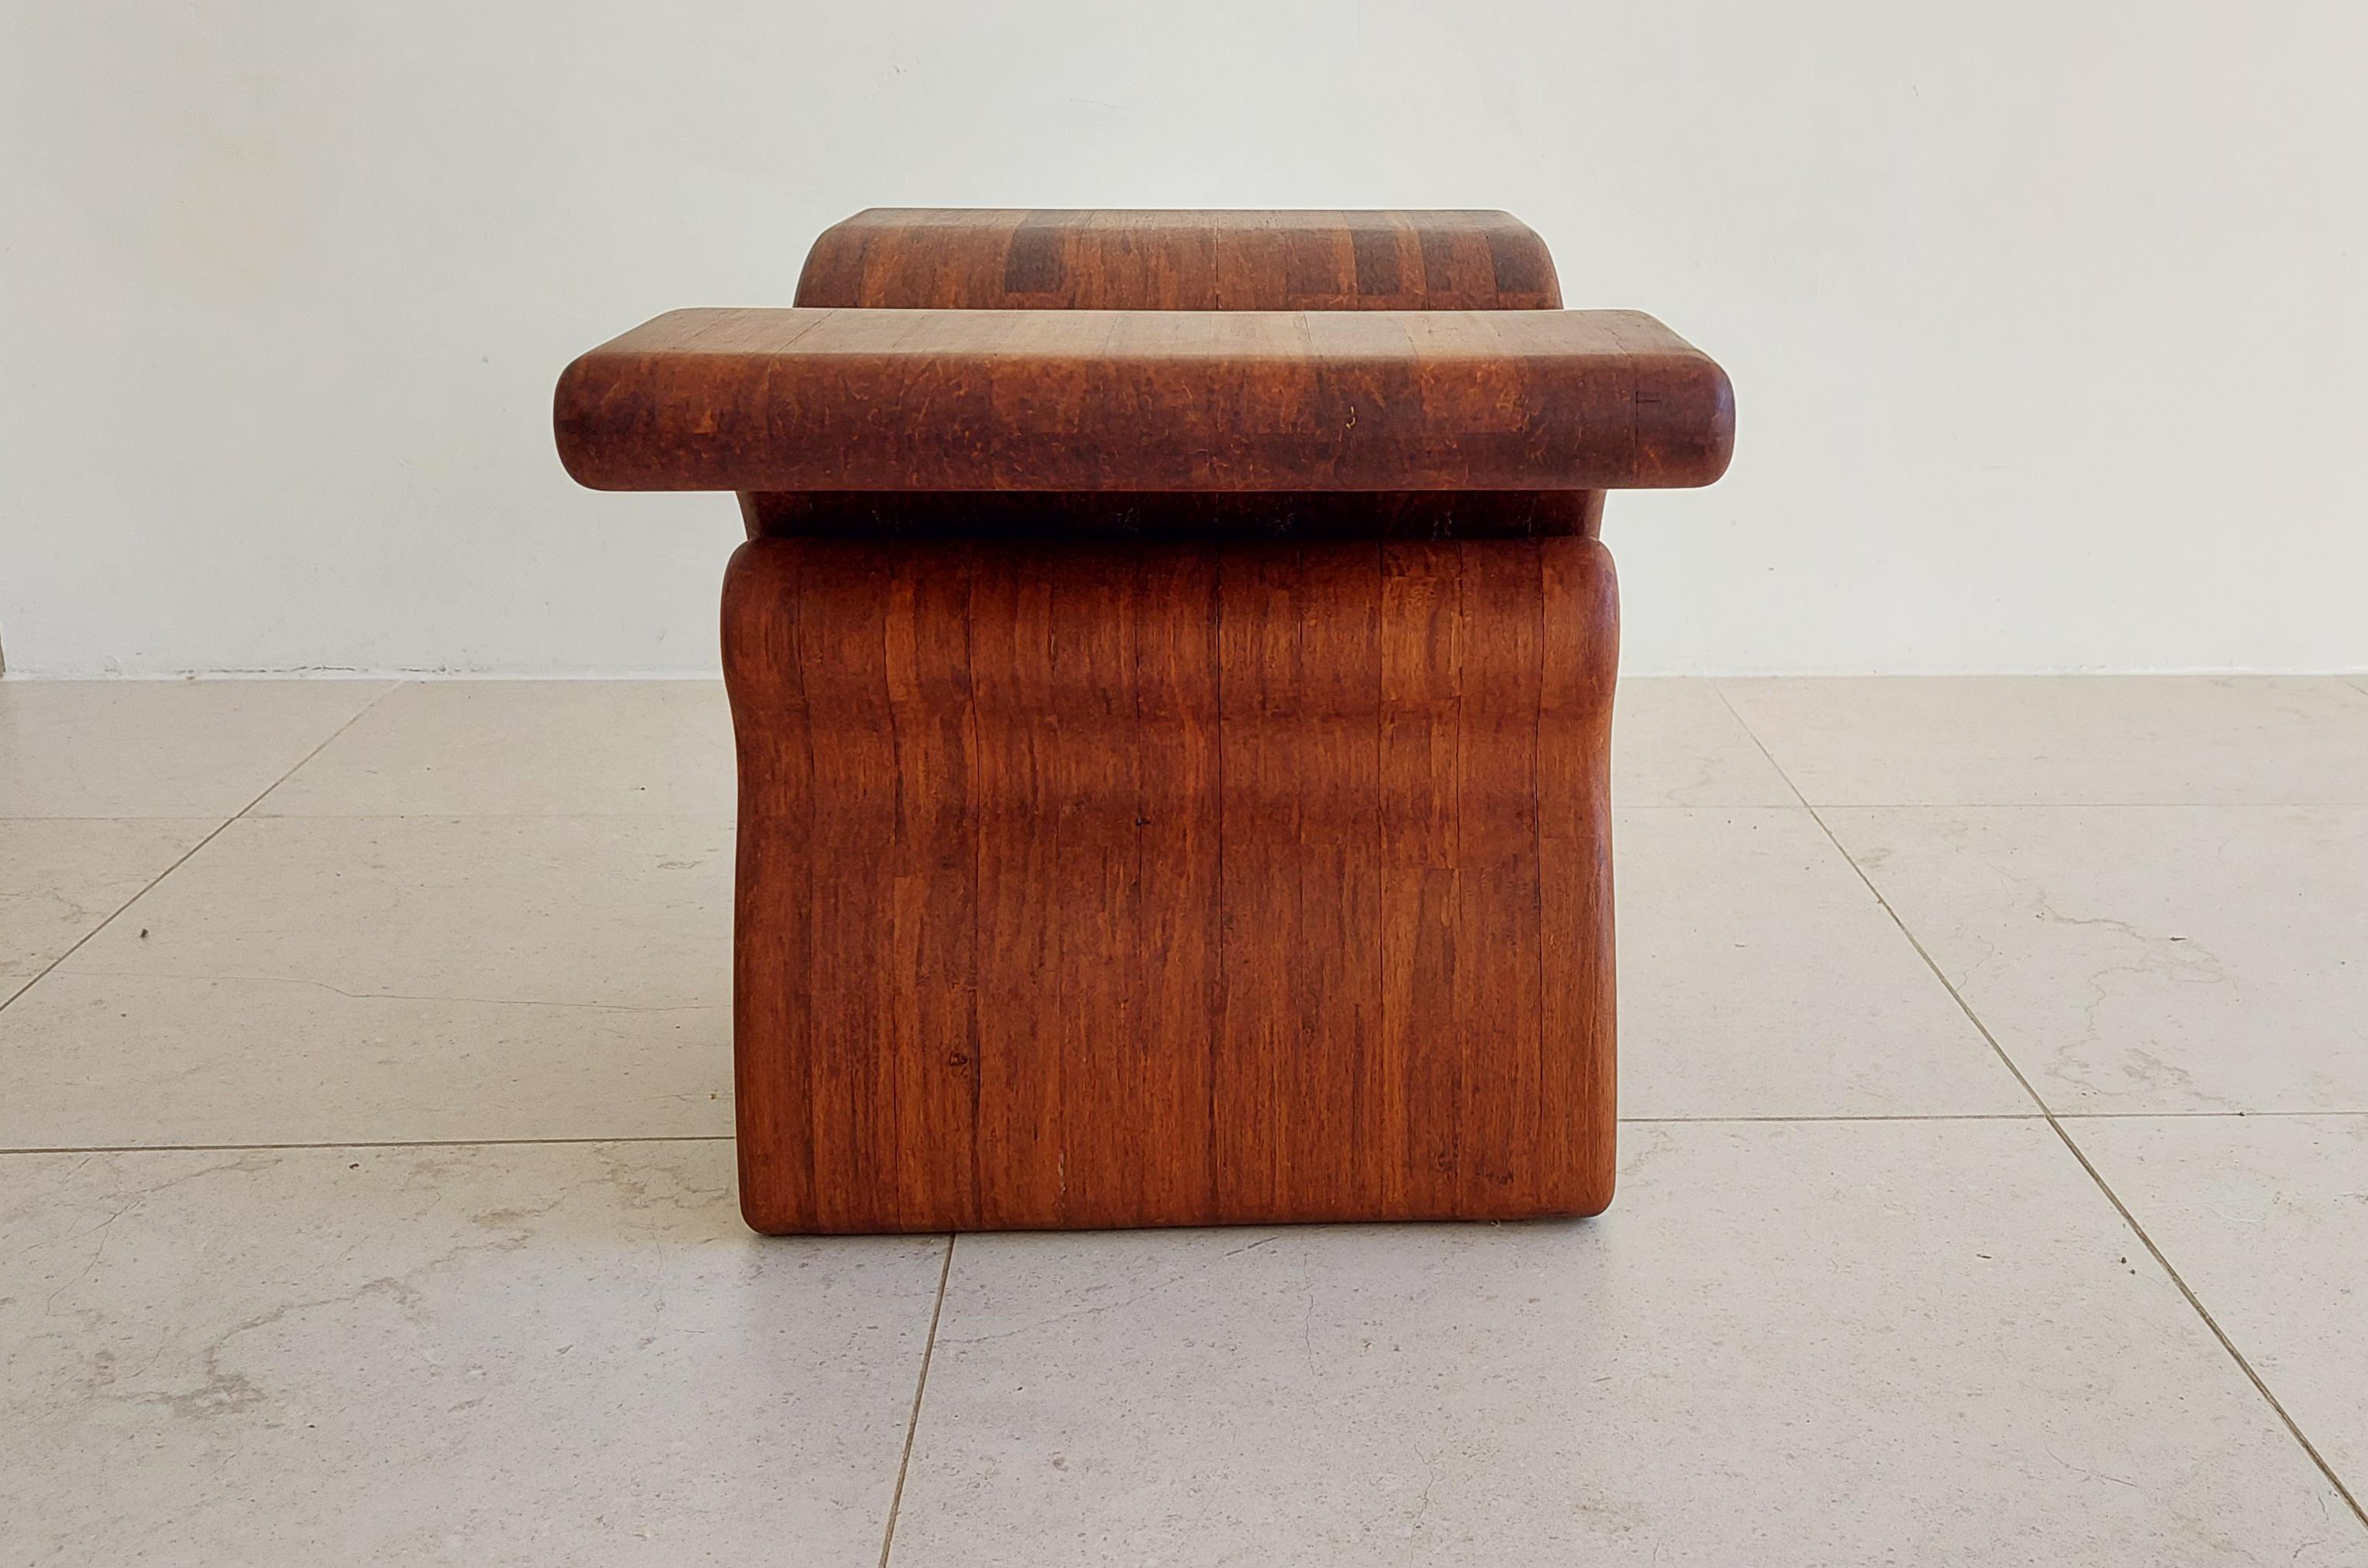 Contemporary Sculptural, Brutalistic, Monolithic  Coffee Table /Side Table/ Object For Sale